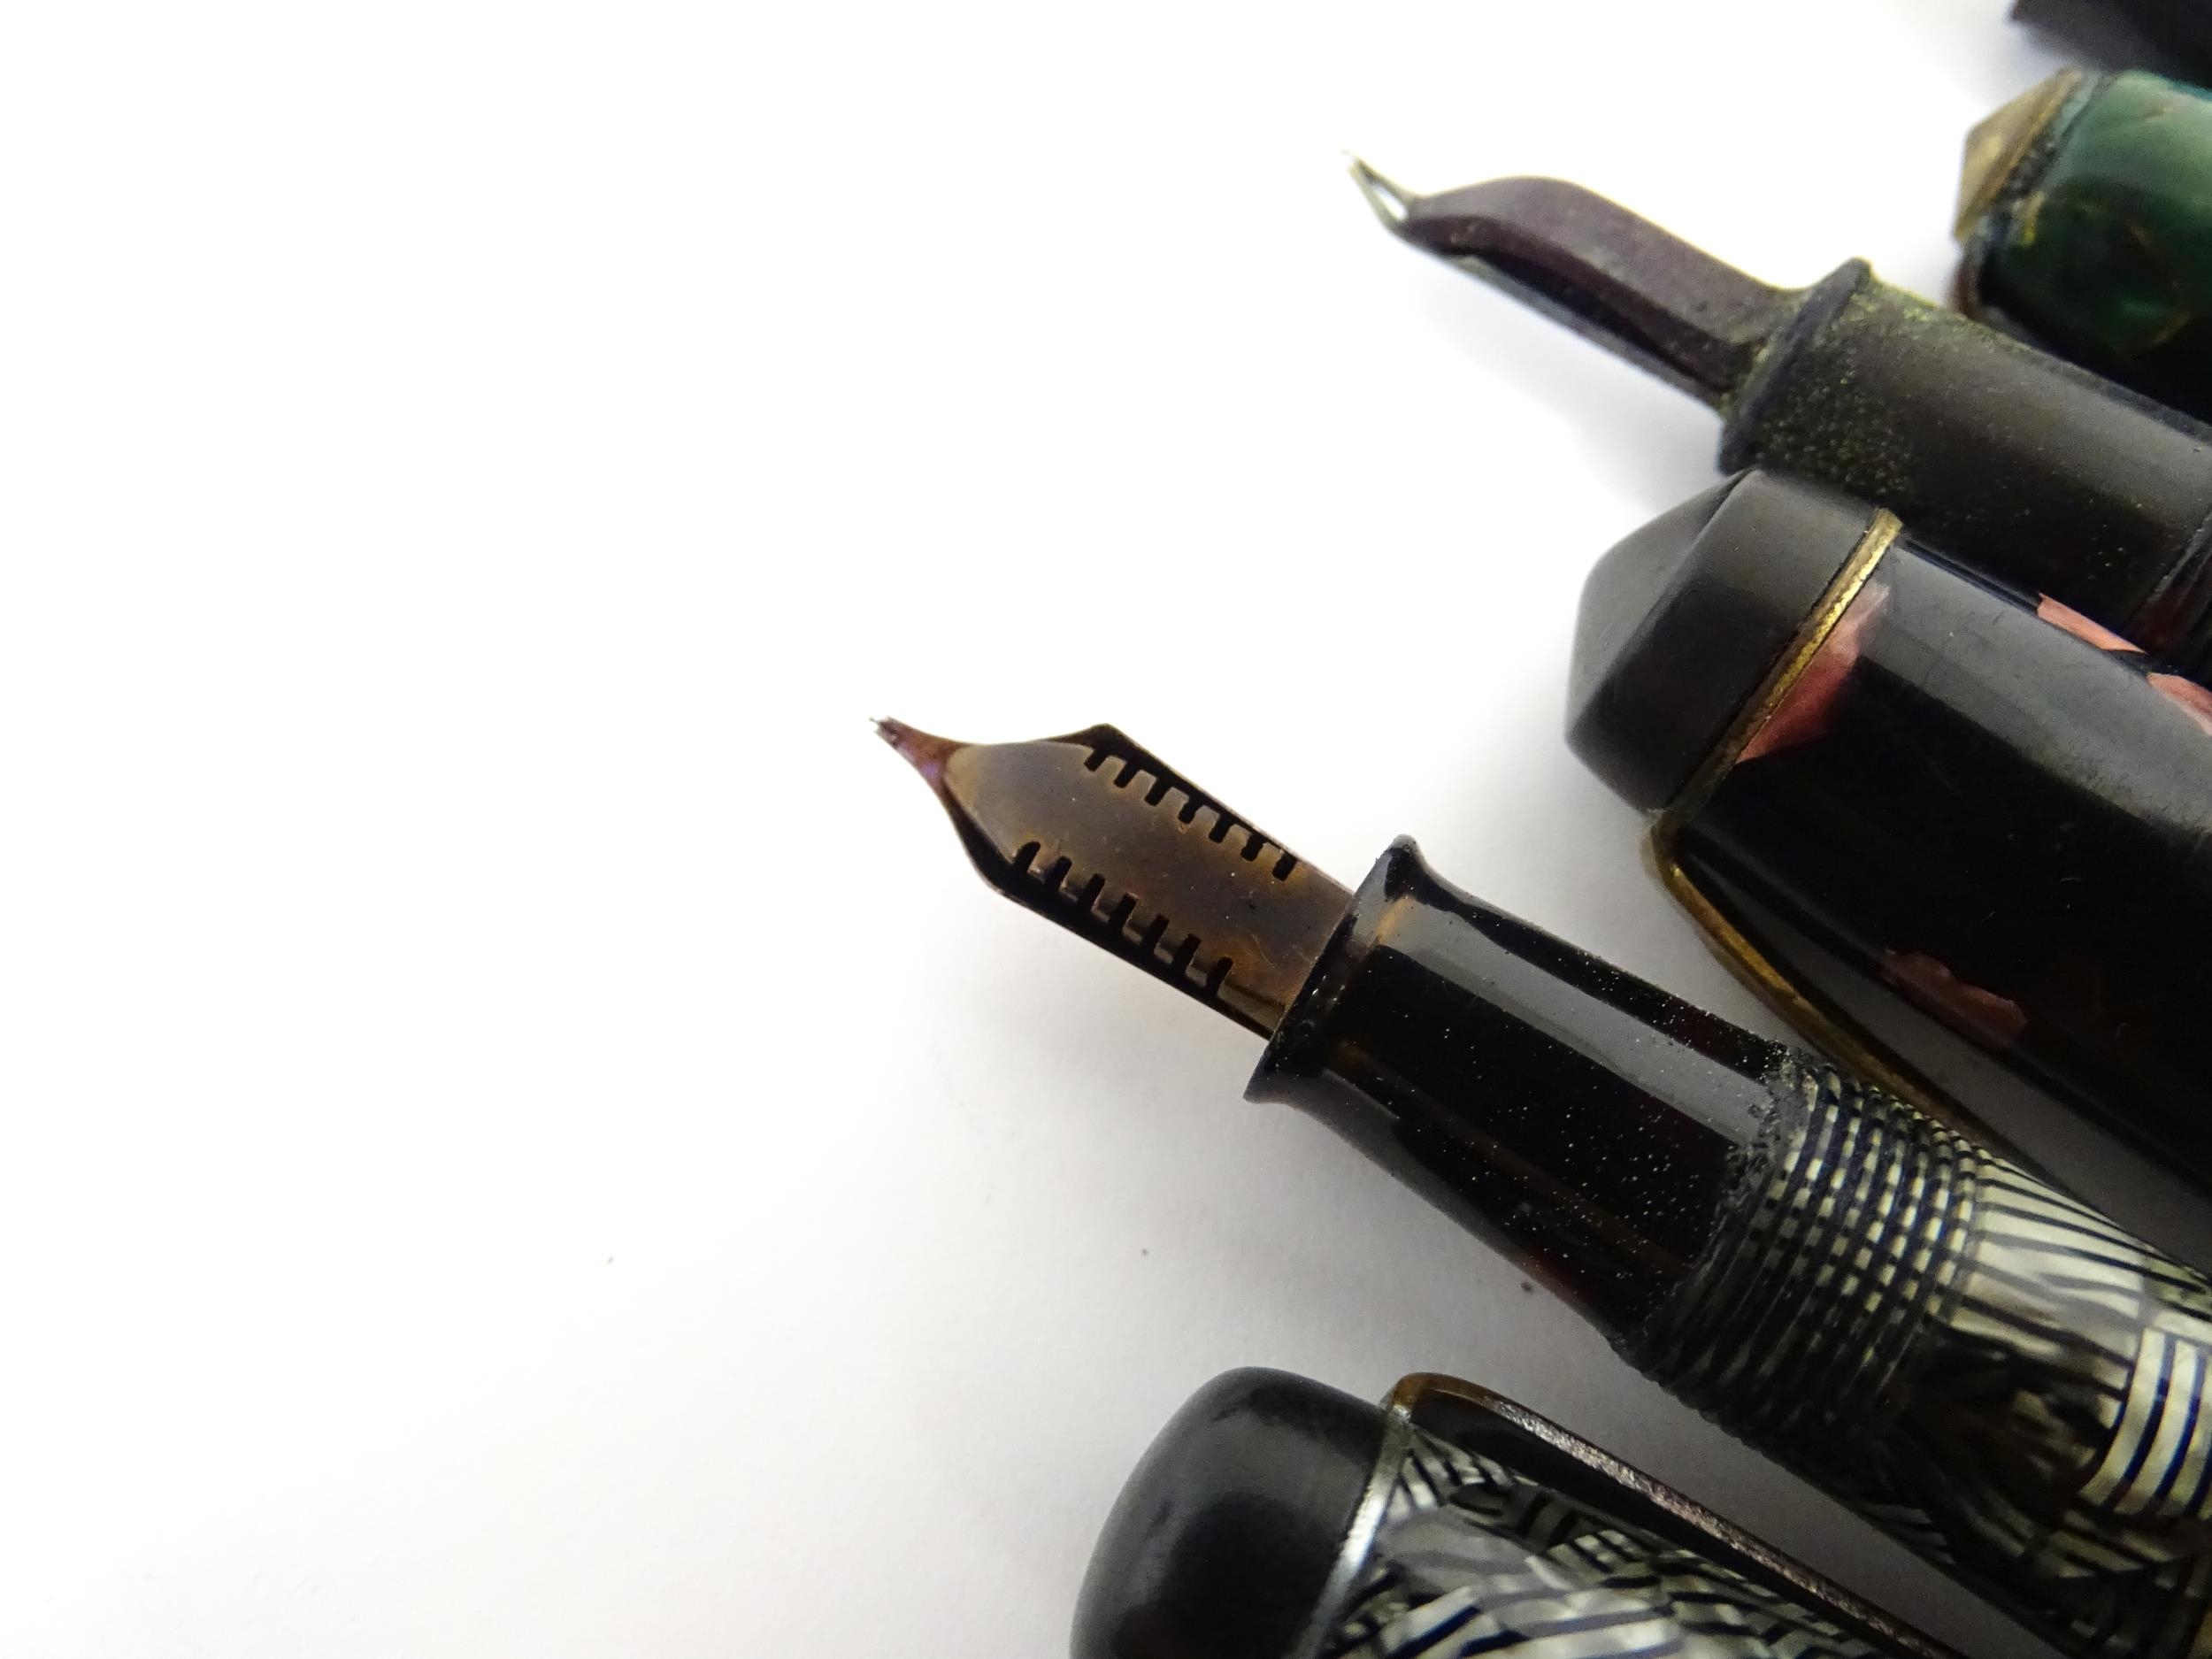 Six fountain pens with 14ct nibs, to include a Parker 'Duofold' with black finish and 14kt gold nib, - Image 19 of 22